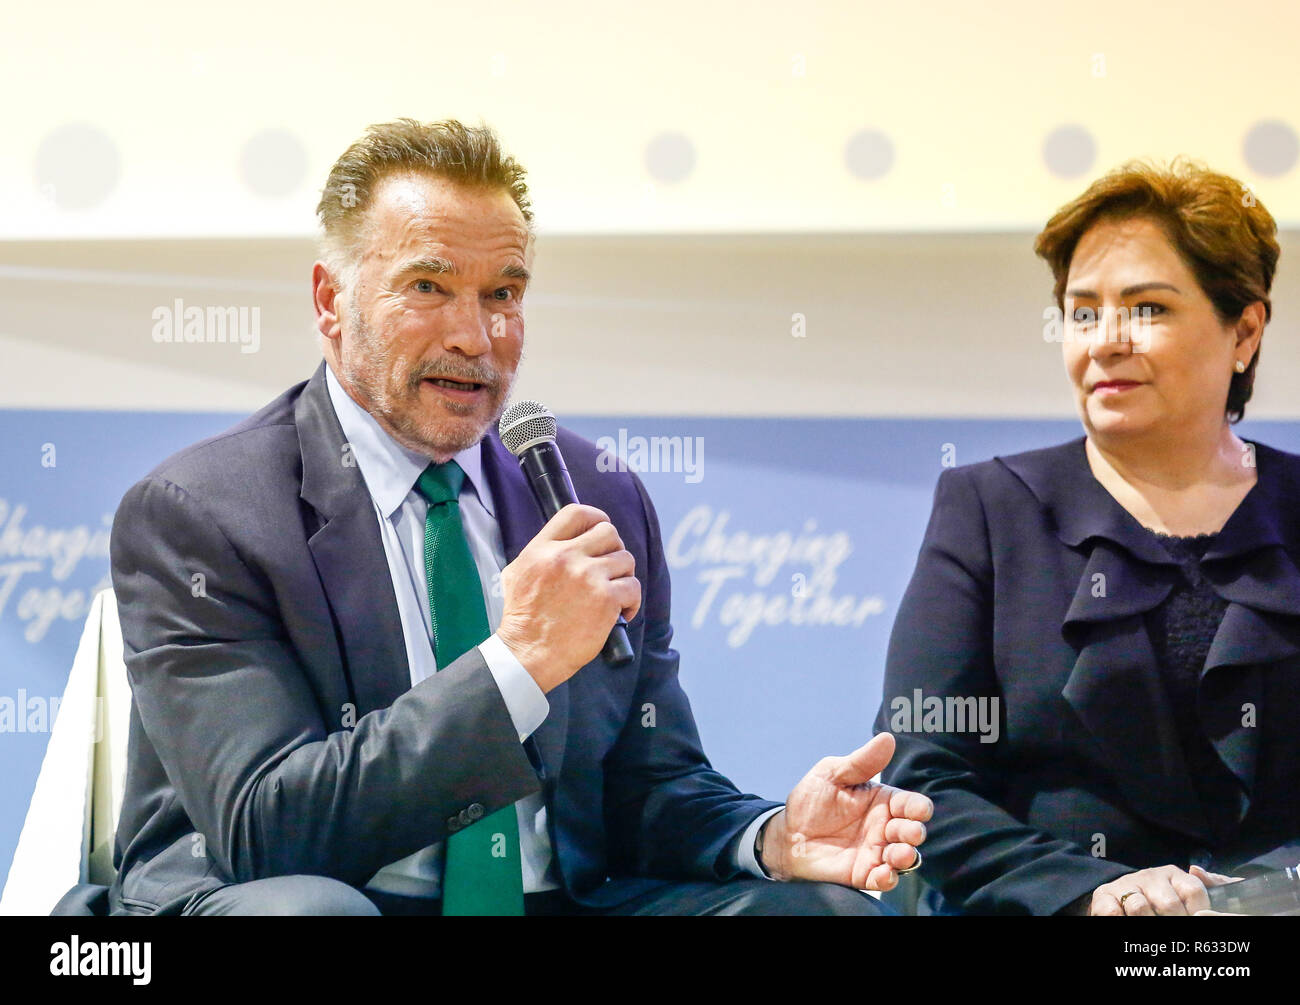 Katowice, Poland. 3rd December, 2018. Arnold Schwarzenegger, USC Schwarzenegger Institute Chair and ex-Governor of California and Patricia Espinosa, Executive Secretary of UNFCCC during the Action Hub Opening panel at the COP24 Katowice, Poland on the 3rd of December 2018. COP24 is organized by UN Framework Convention for Climate Change (UNFCCC). Credit: Michal Busko/Alamy Live News Stock Photo